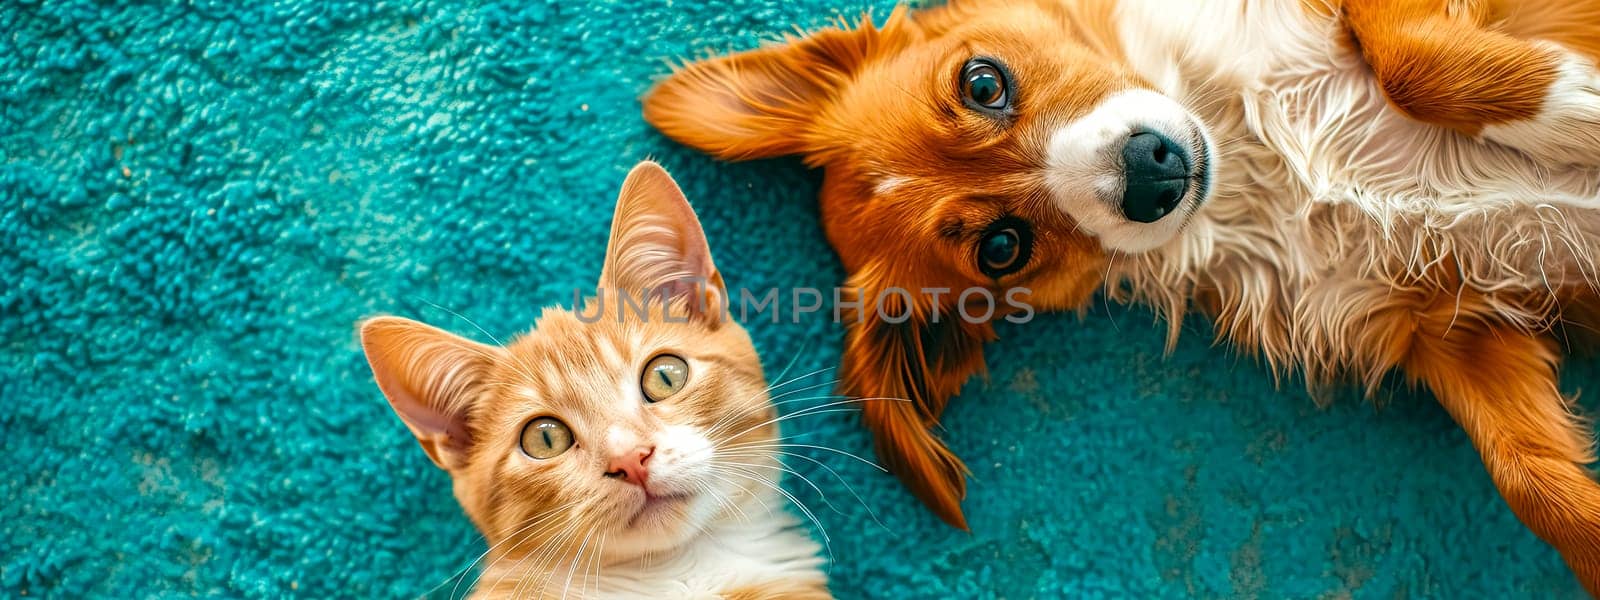 A heartwarming top view of a ginger cat and a brown and white dog lying on a turquoise carpet, looking up with curious and endearing expressions